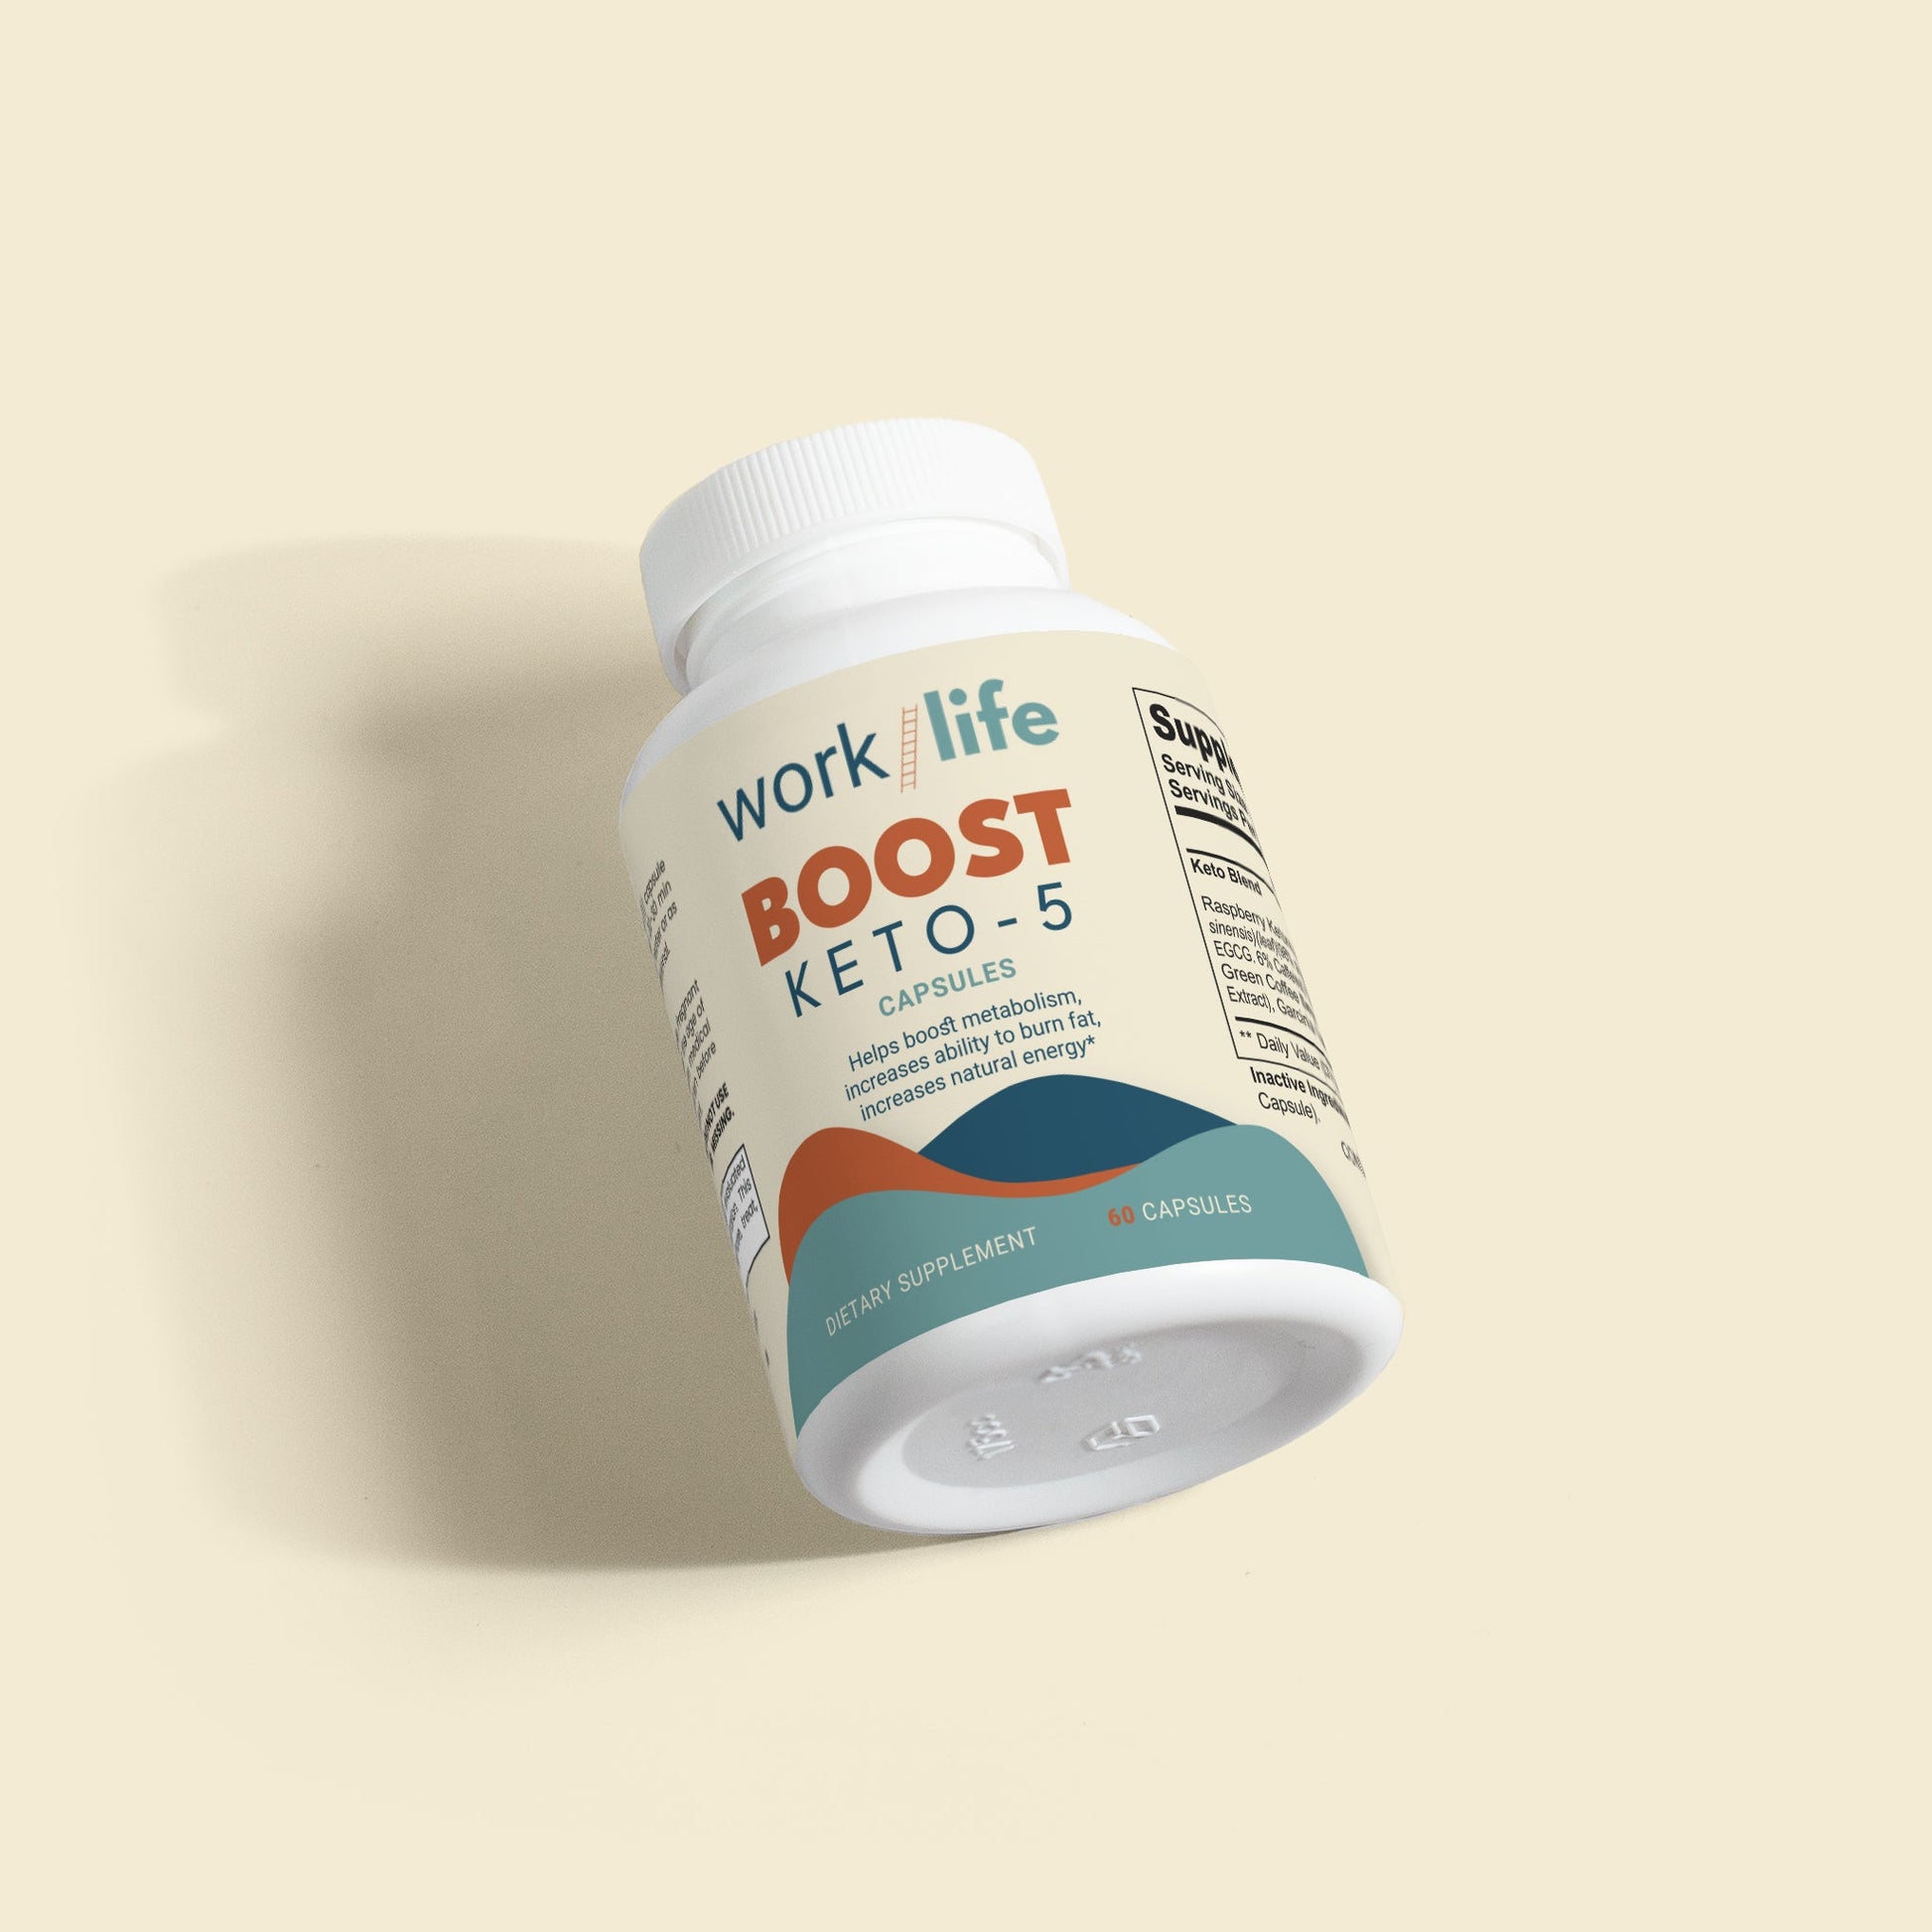 Boost - Keto-5 Ketosis Energy Blend - Work/Life Supplements